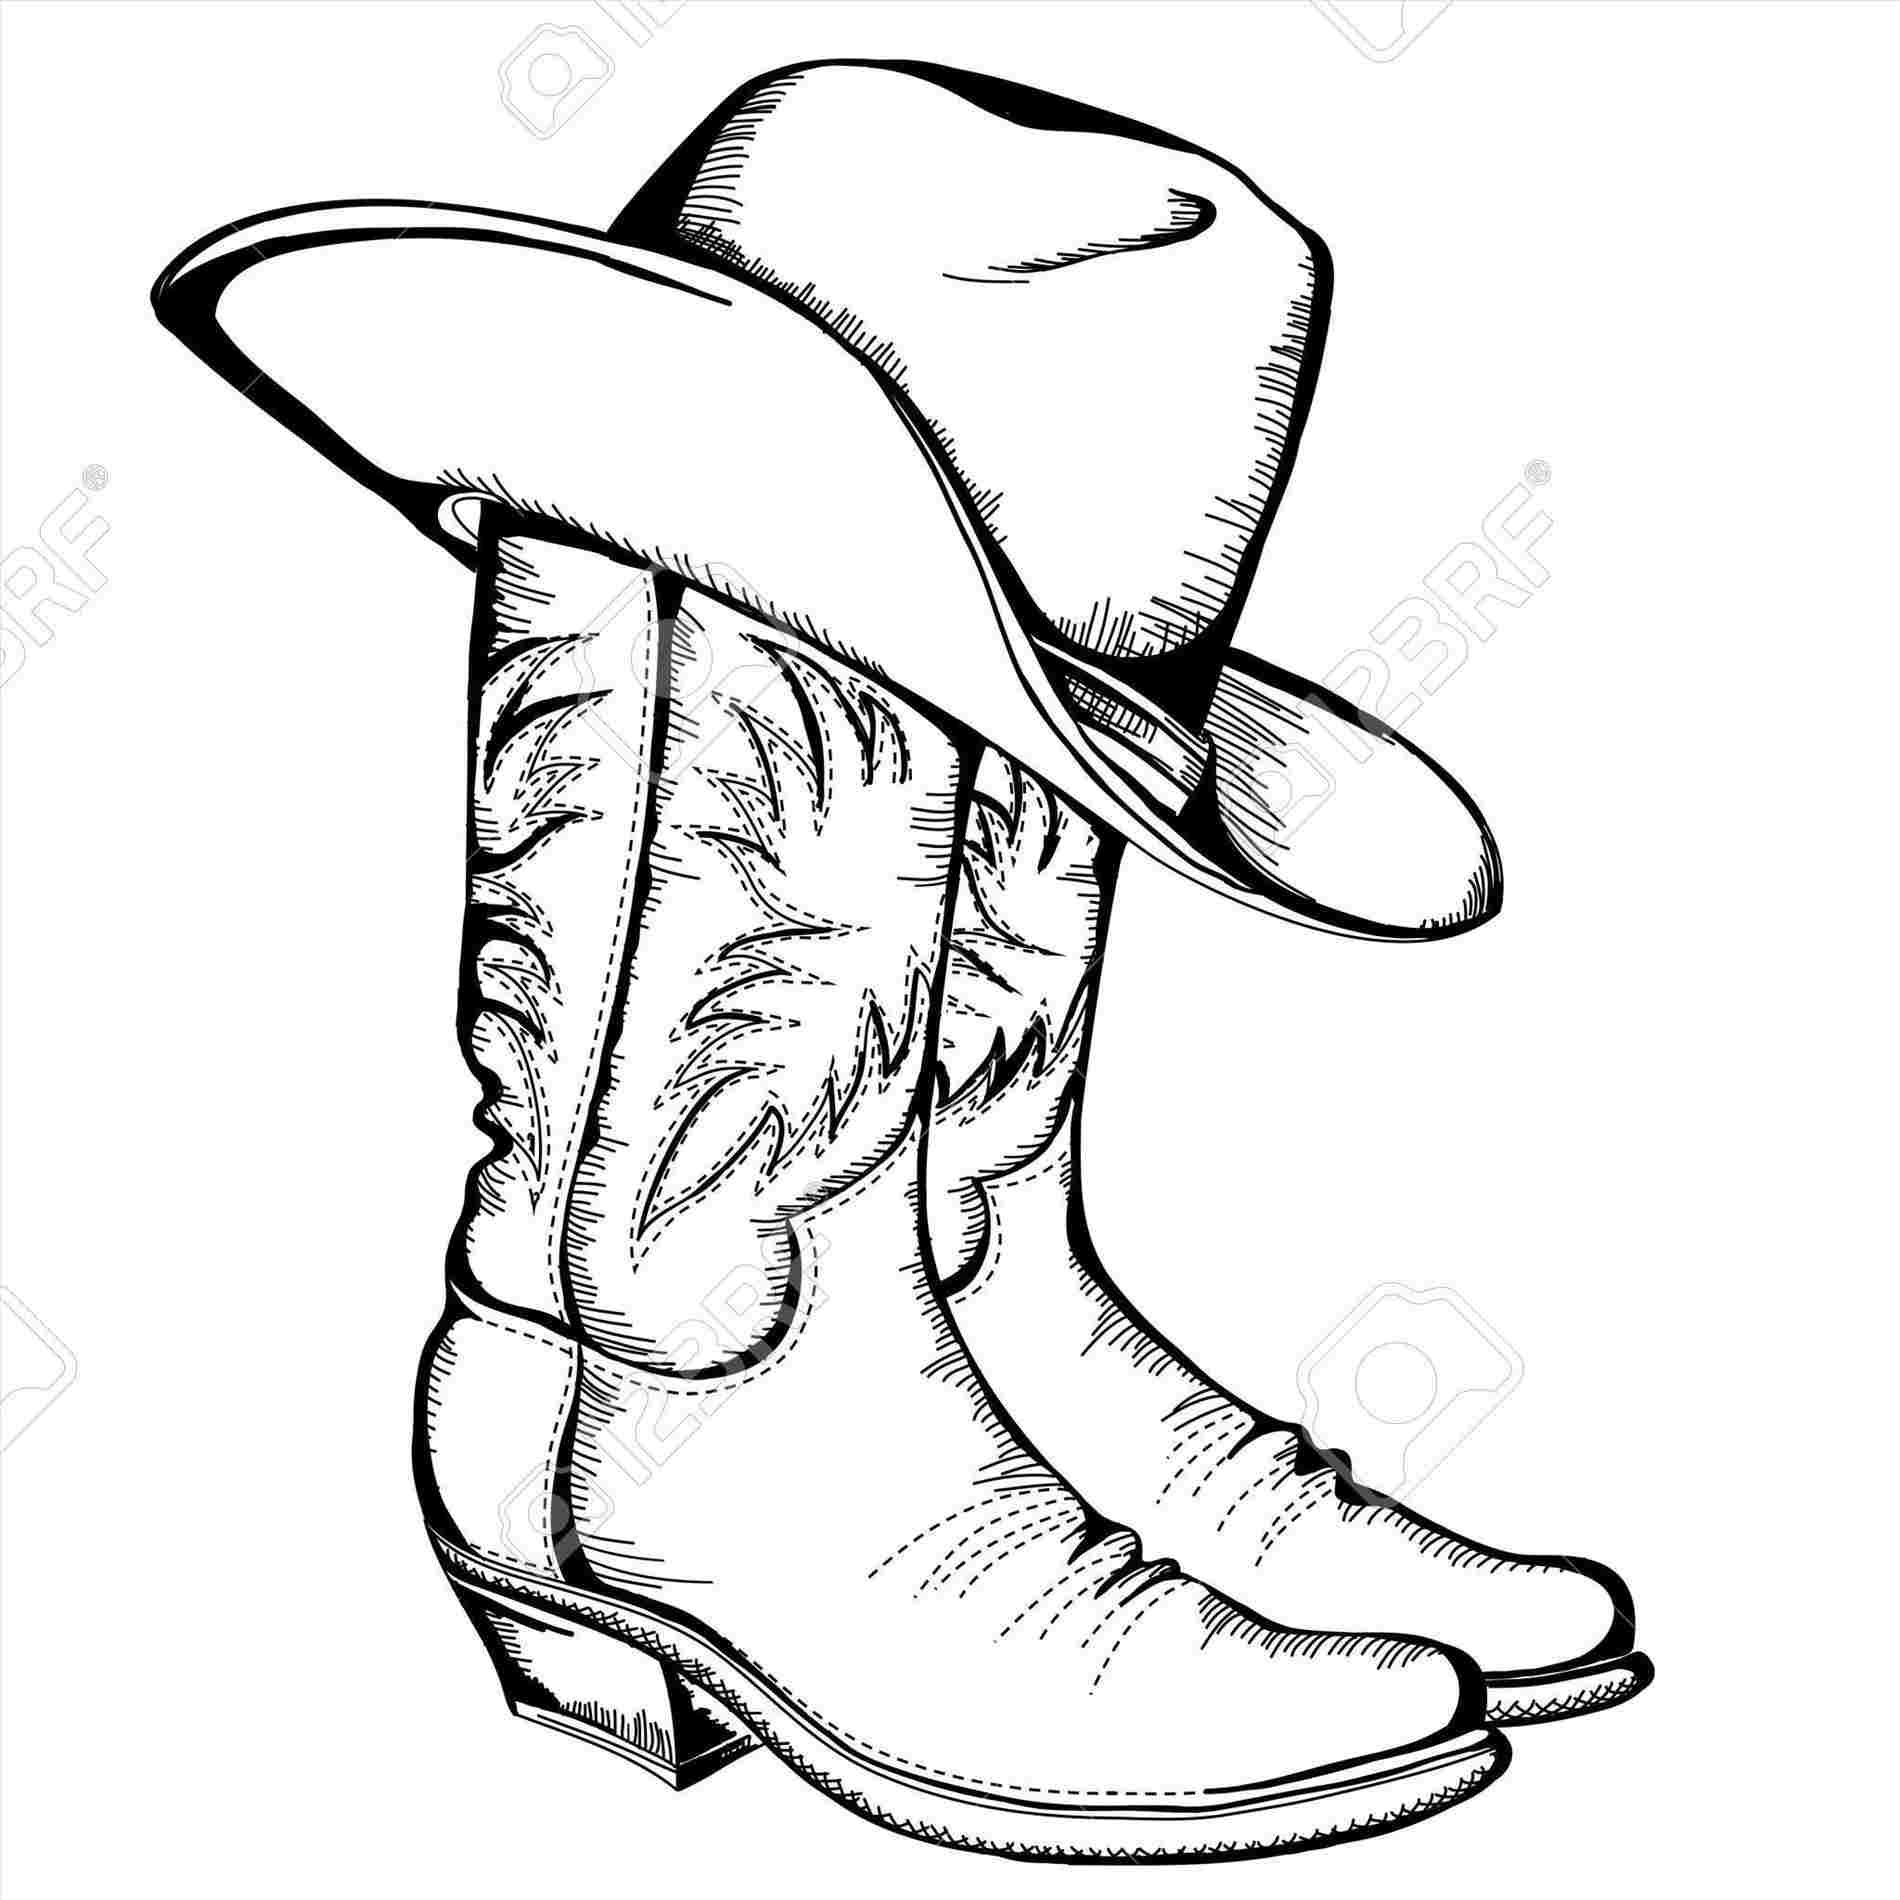 Cowboy Hat Coloring Pages Cowboy Boot Drawingrhanimalialifeclub Hat Coloring Page In Boots